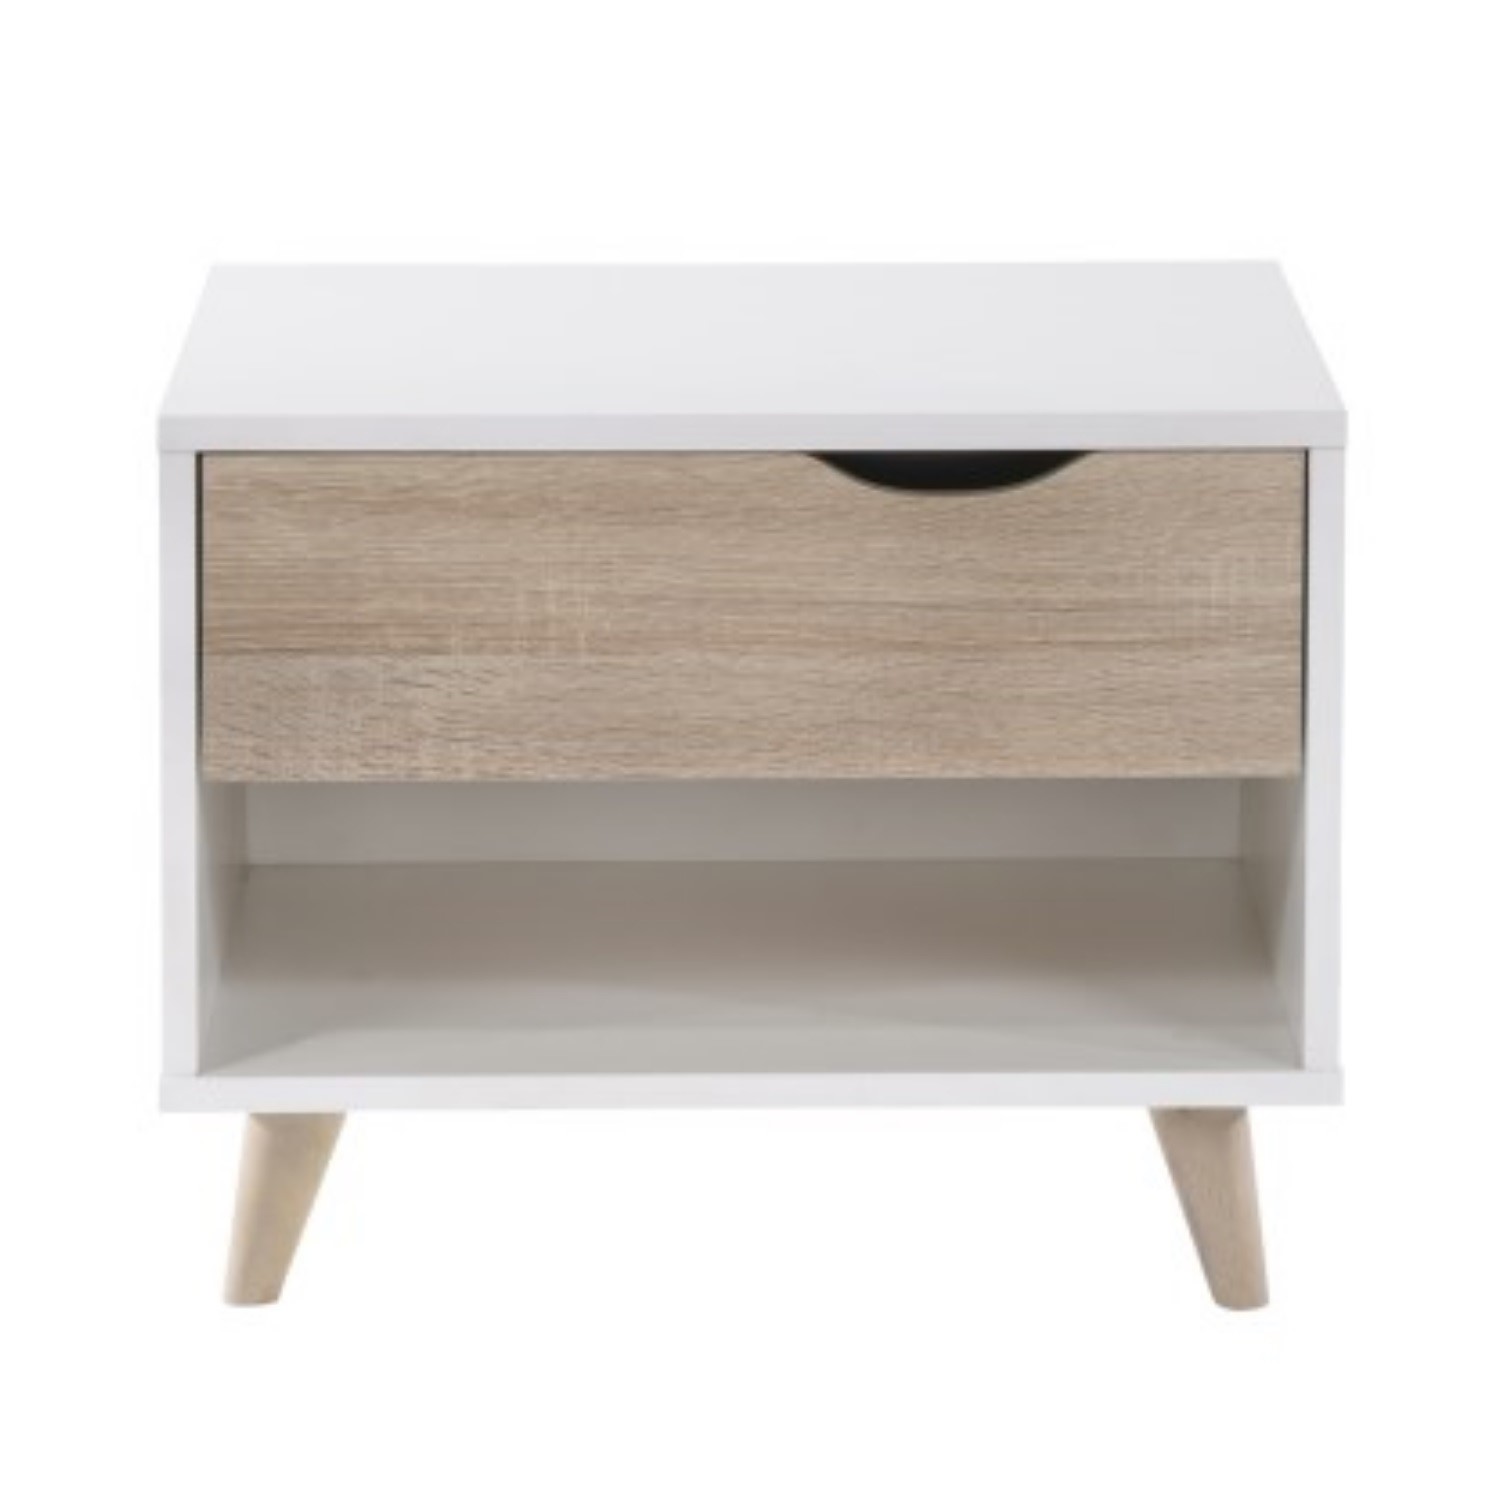 Photo of Scandi white and oak bedside table with drawer - lpd